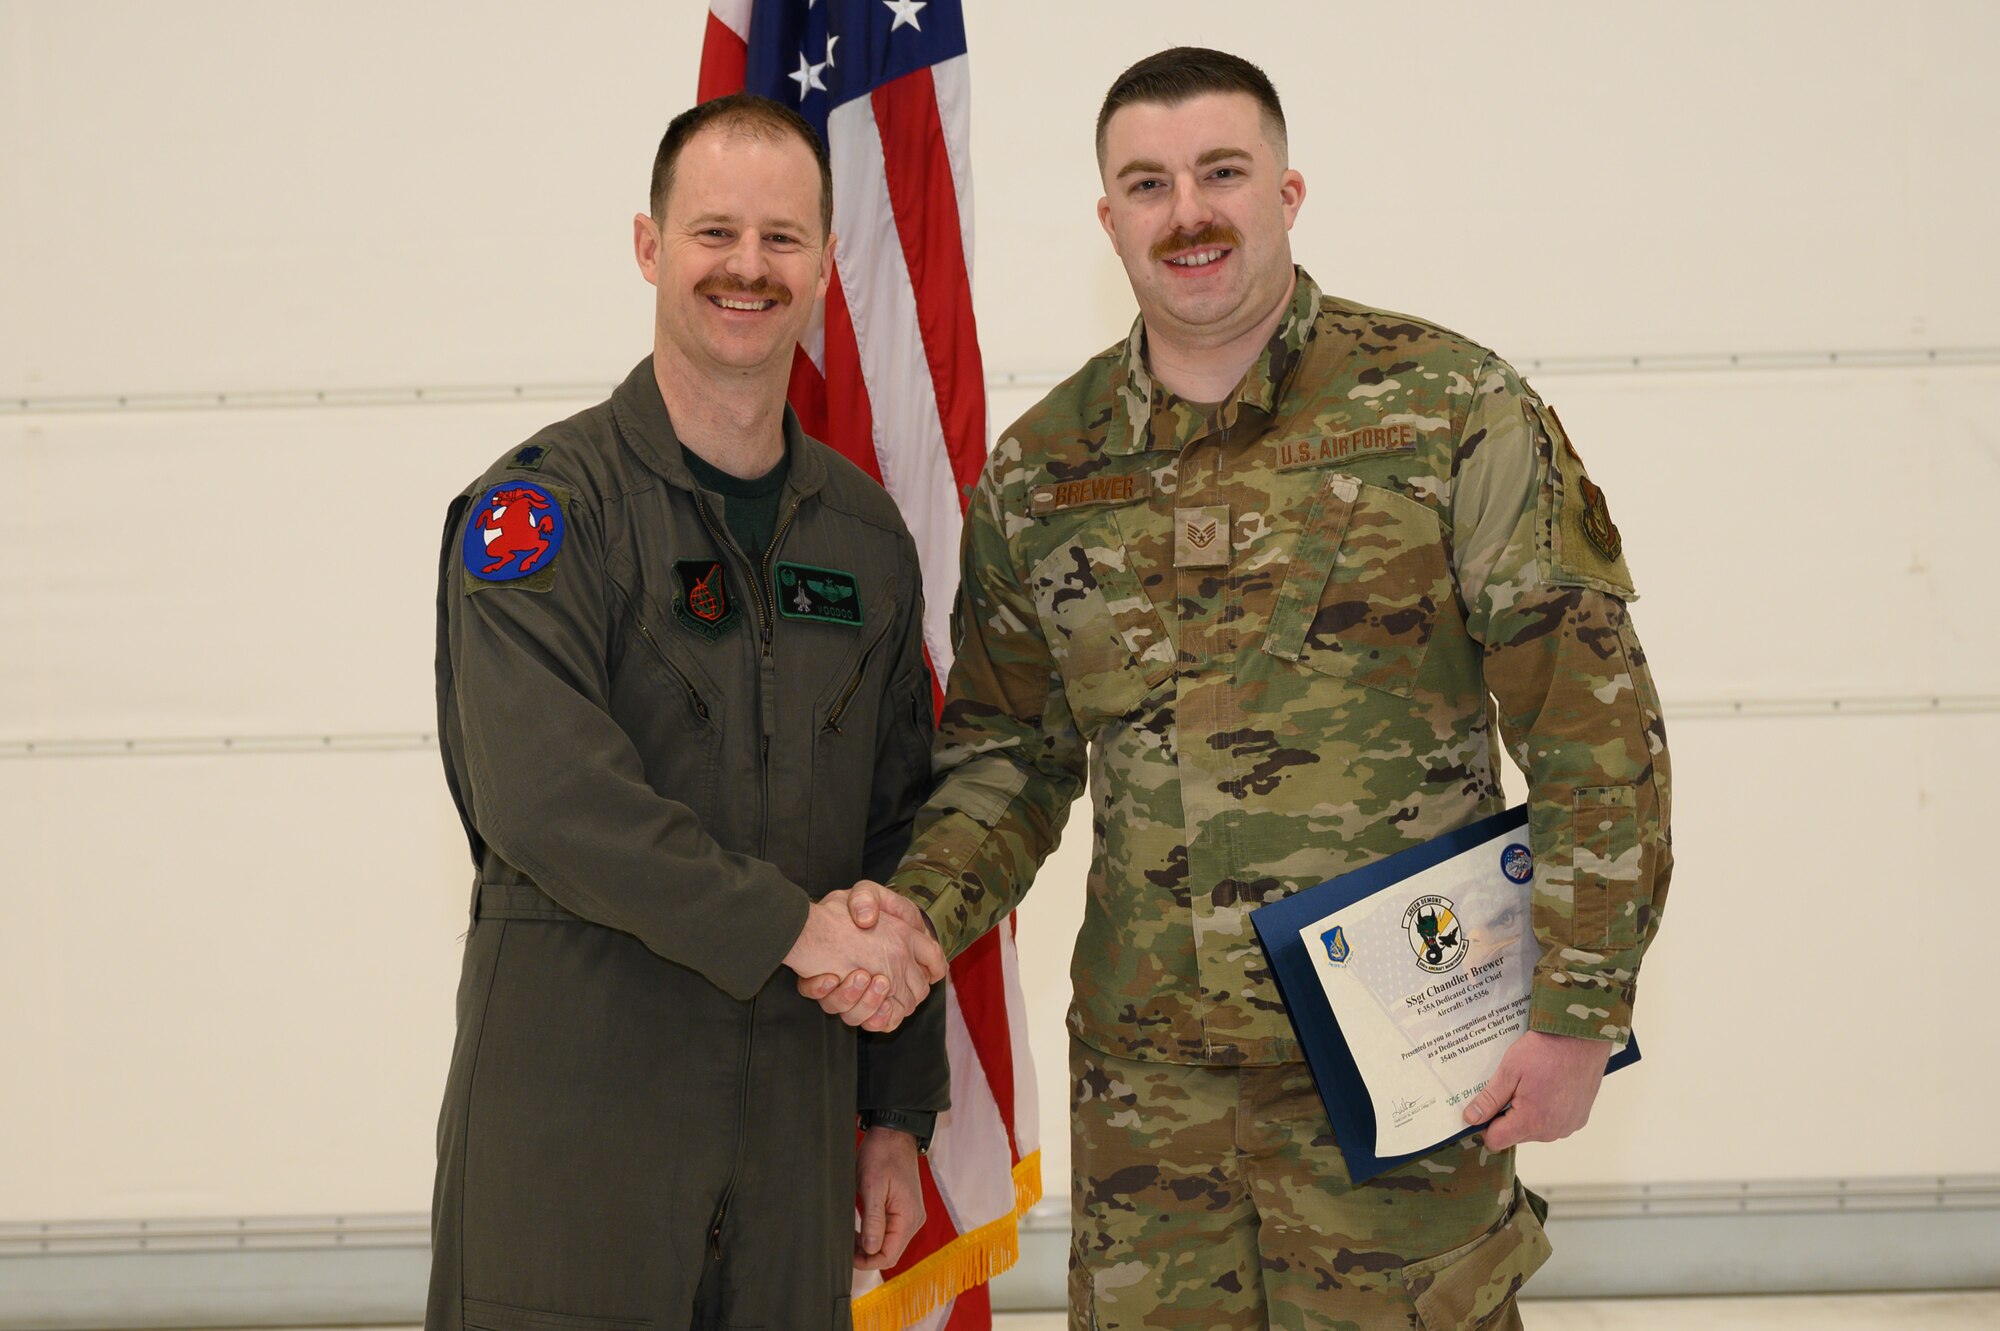 U.S. Air Force Lt. Col. Ryan Worrell, 356th Fighter Squadron commander, poses for a photo with Staff Sgt. Chandler Brewer, a 356th Aircraft Maintenance Unit crew chief, during a ceremony on Eielson Air Force Base, Alaska, Jan. 6, 2023.